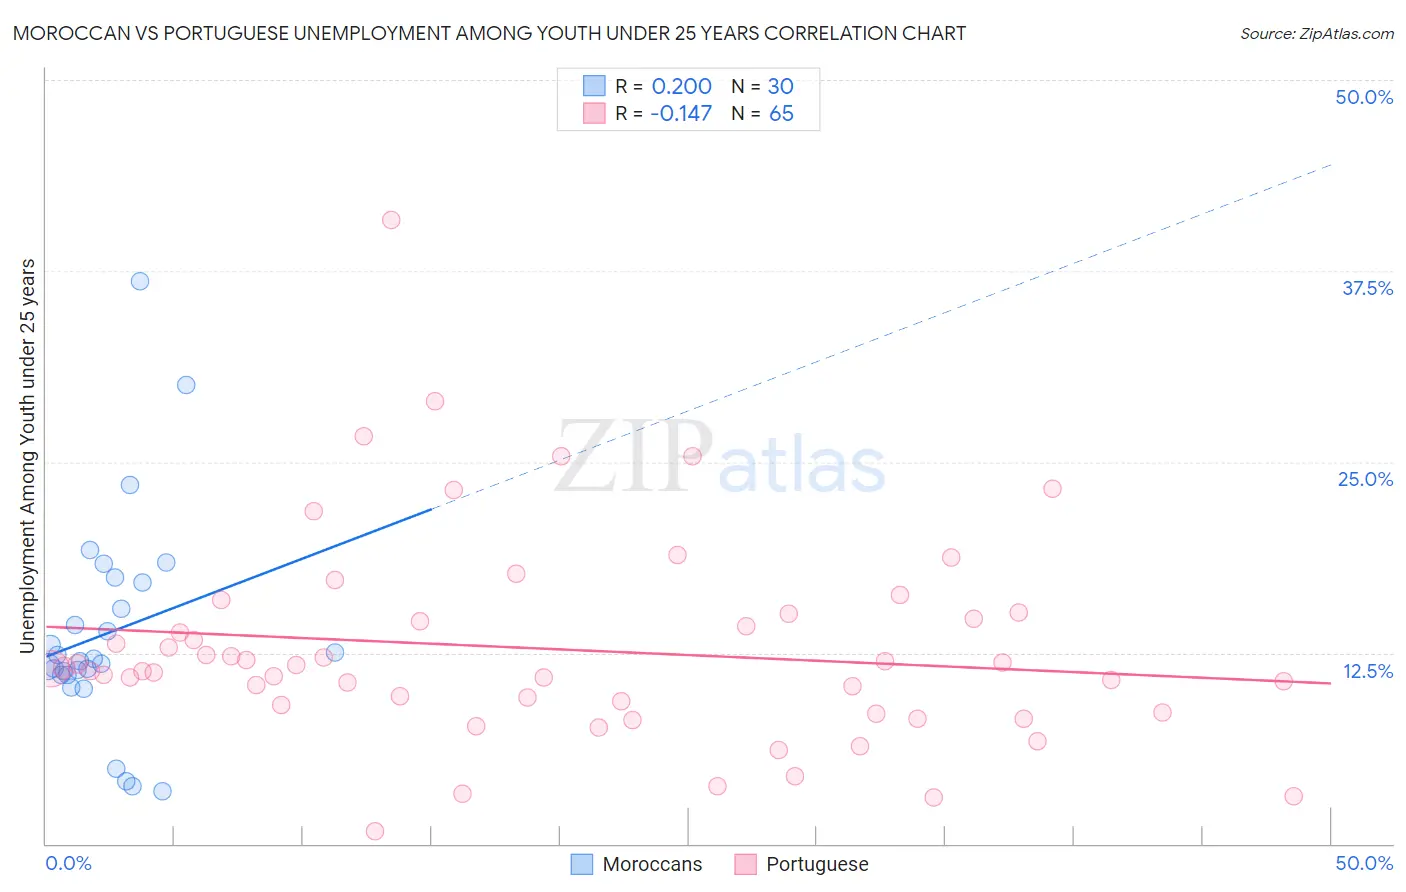 Moroccan vs Portuguese Unemployment Among Youth under 25 years